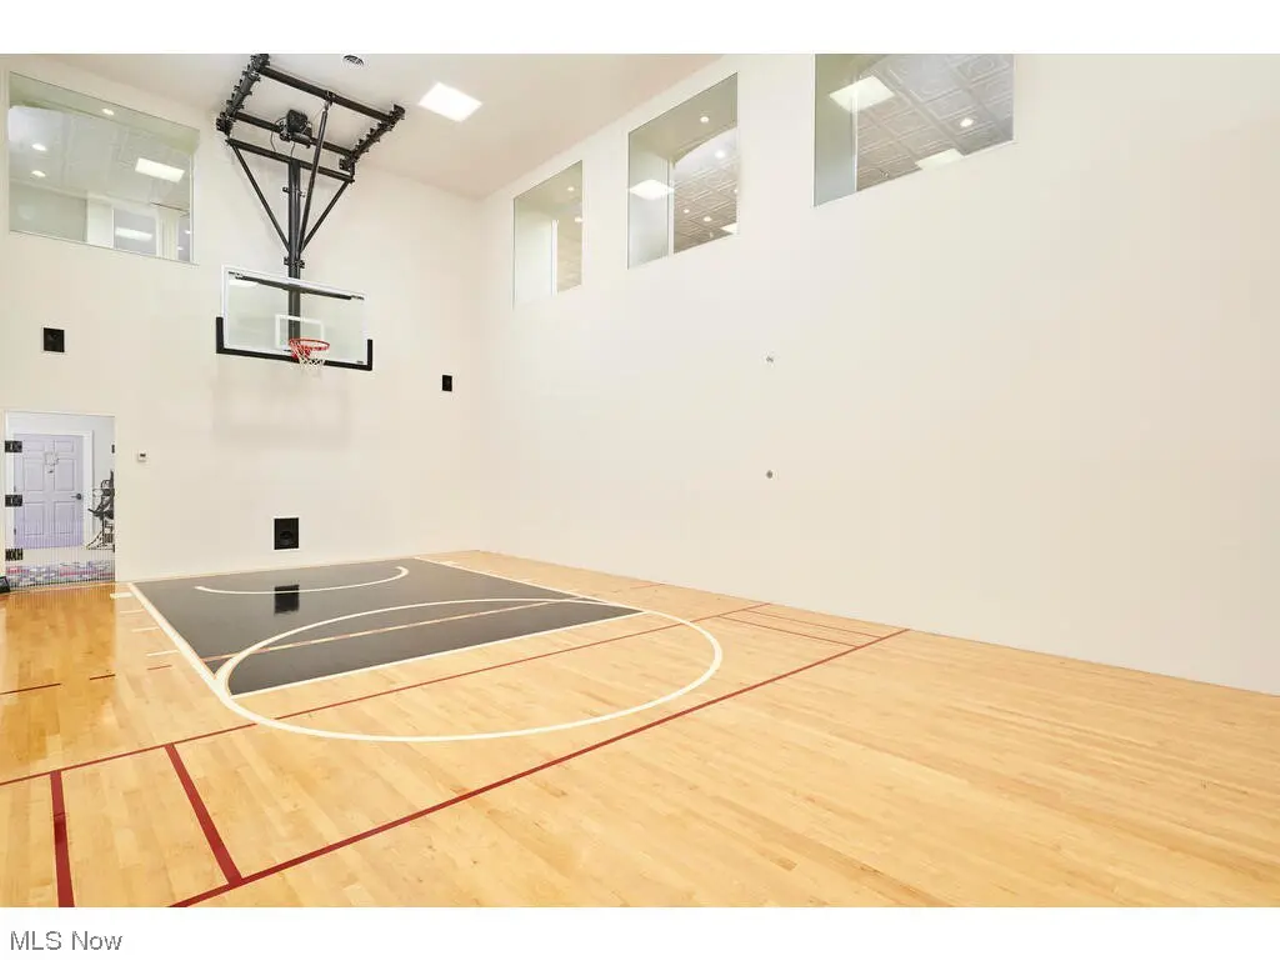 $3 Million, 9,000-Square-Foot Bath Mansion Boasts an Indoor Basketball Court